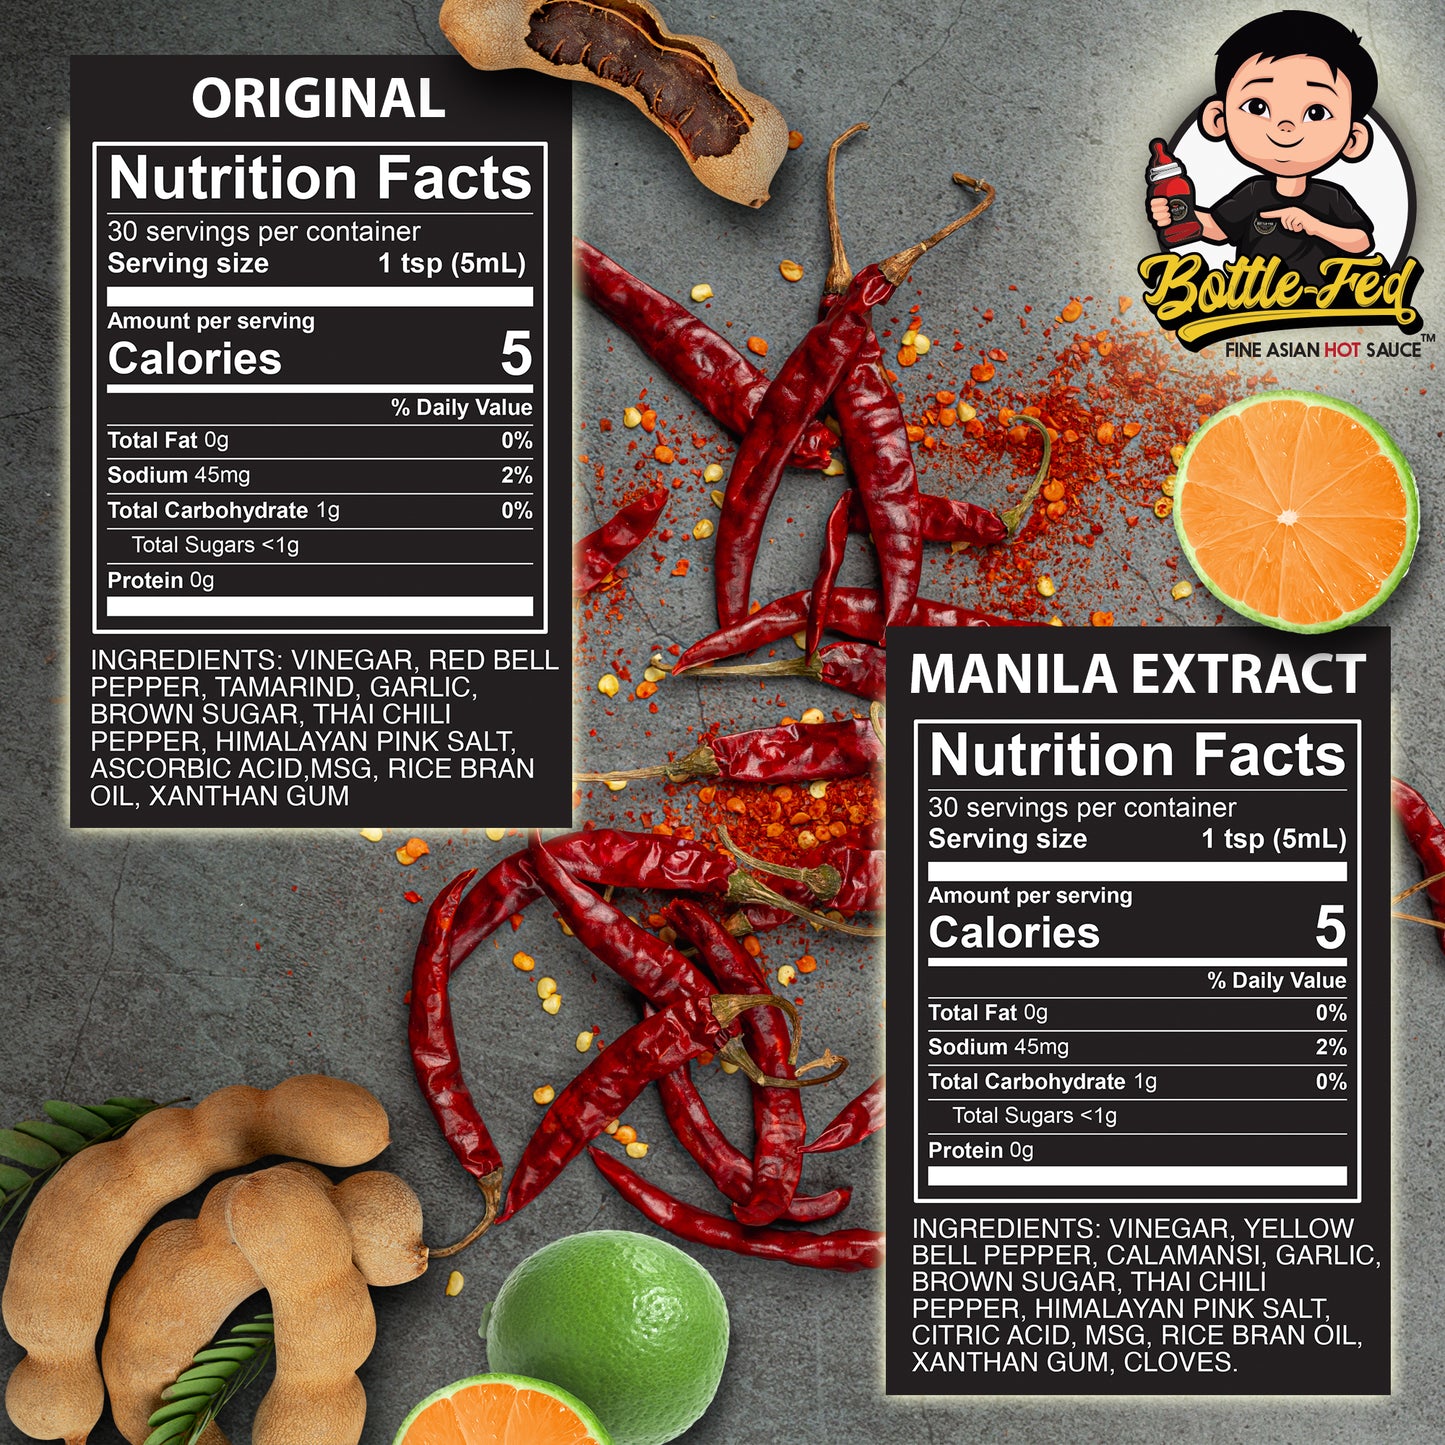 2-pack: Original and Manila Extract - Bottle-Fed Hot Sauce